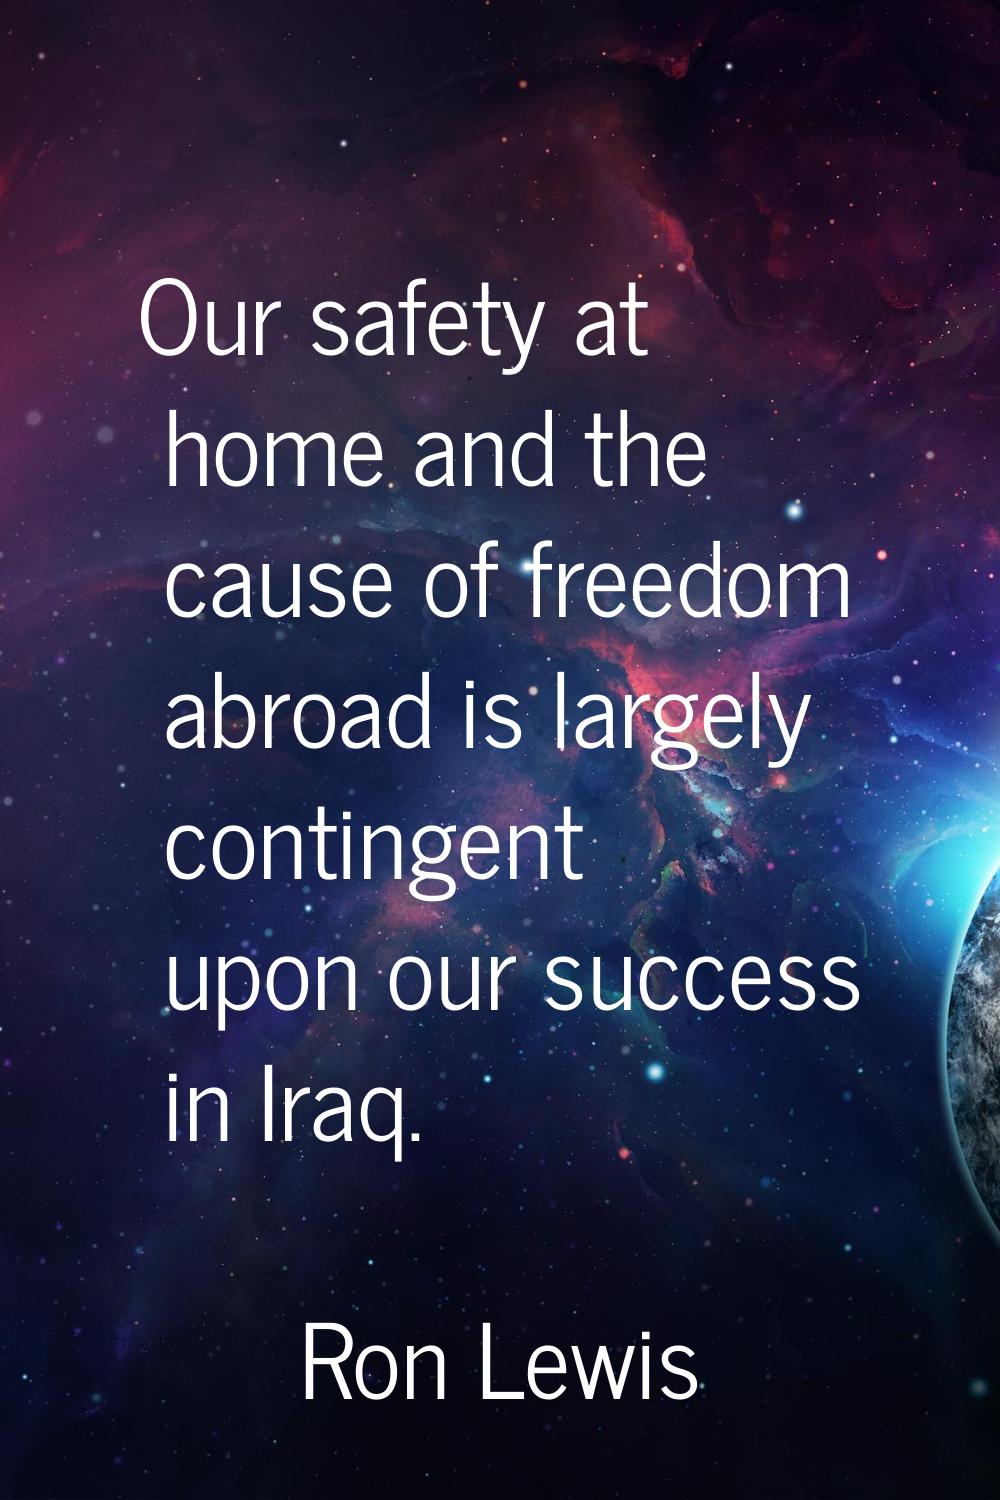 Our safety at home and the cause of freedom abroad is largely contingent upon our success in Iraq.